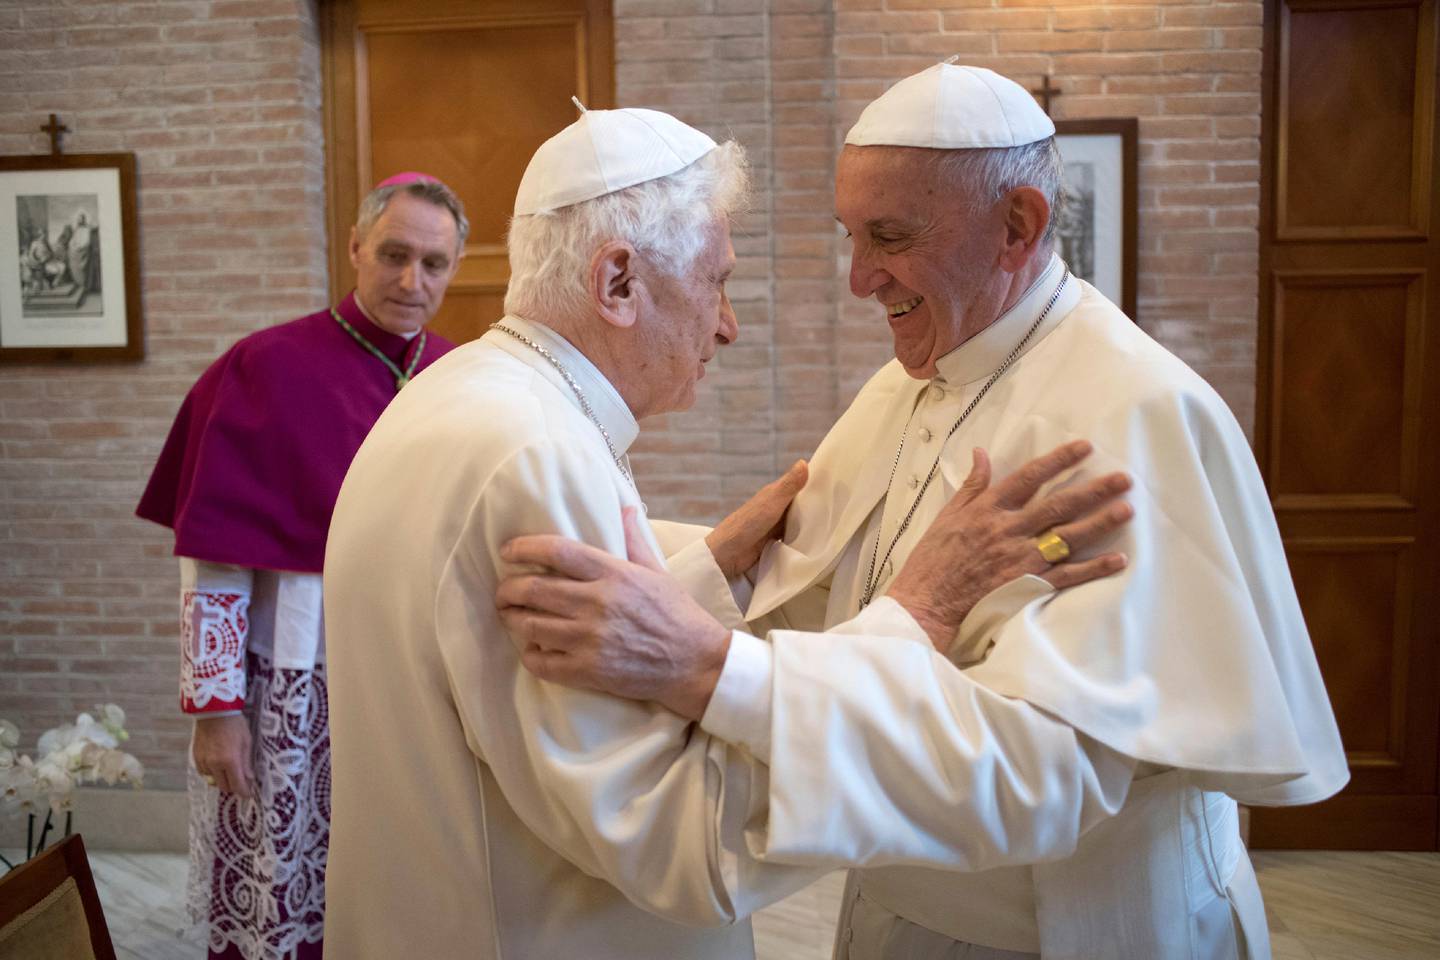 Pope Francis greets Pope Emeritus Benedict XVI in the former Convent Mater Ecclesiae at the Vatican in November 2016. AP